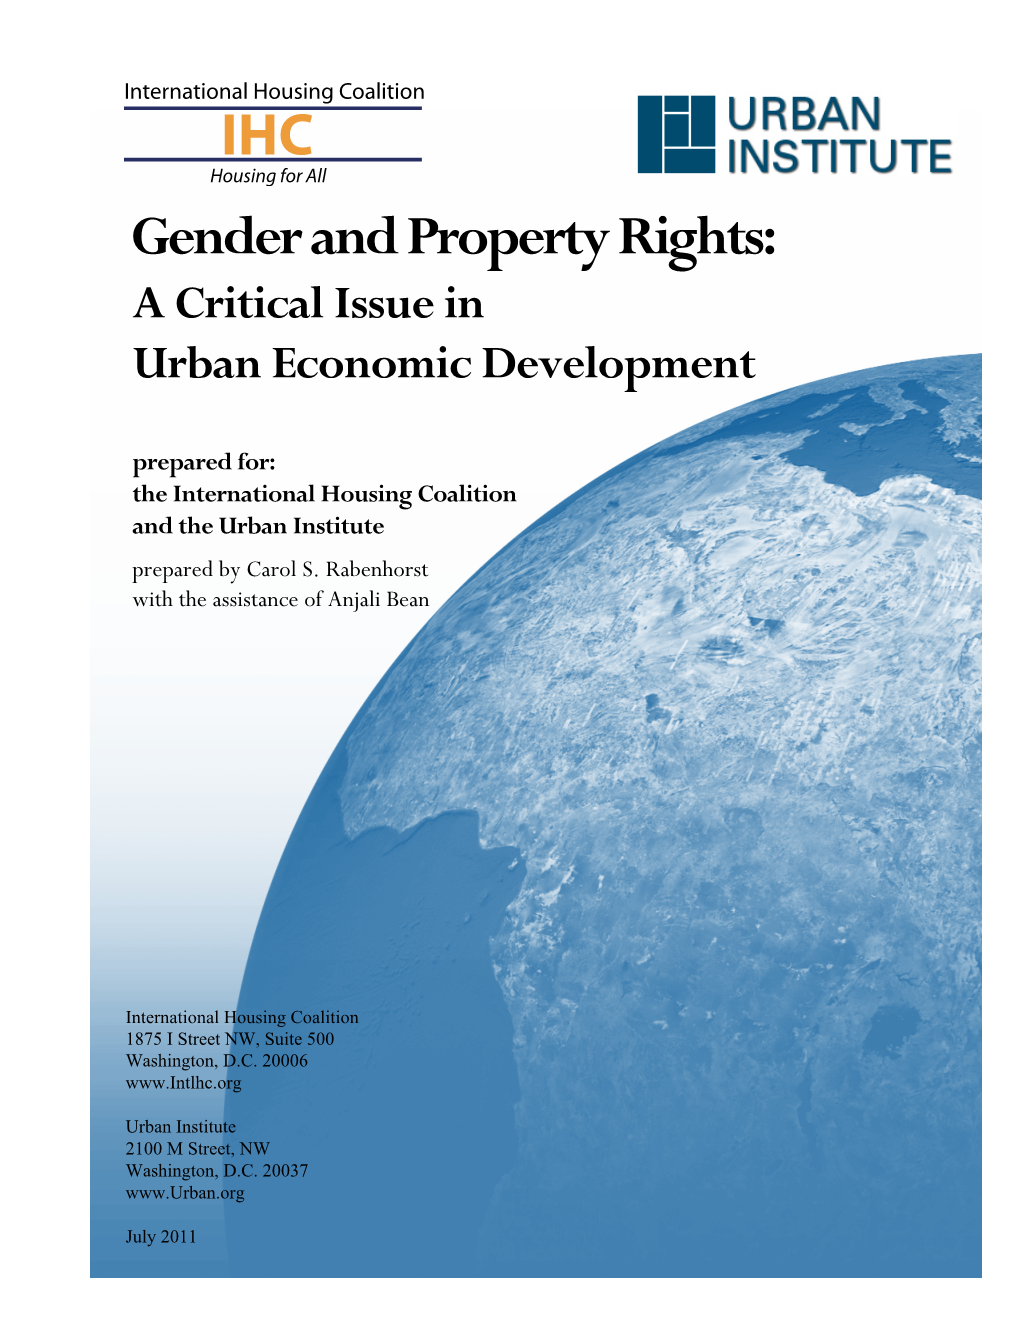 Gender and Property Rights: a Critical Issue in Urban Economic Development